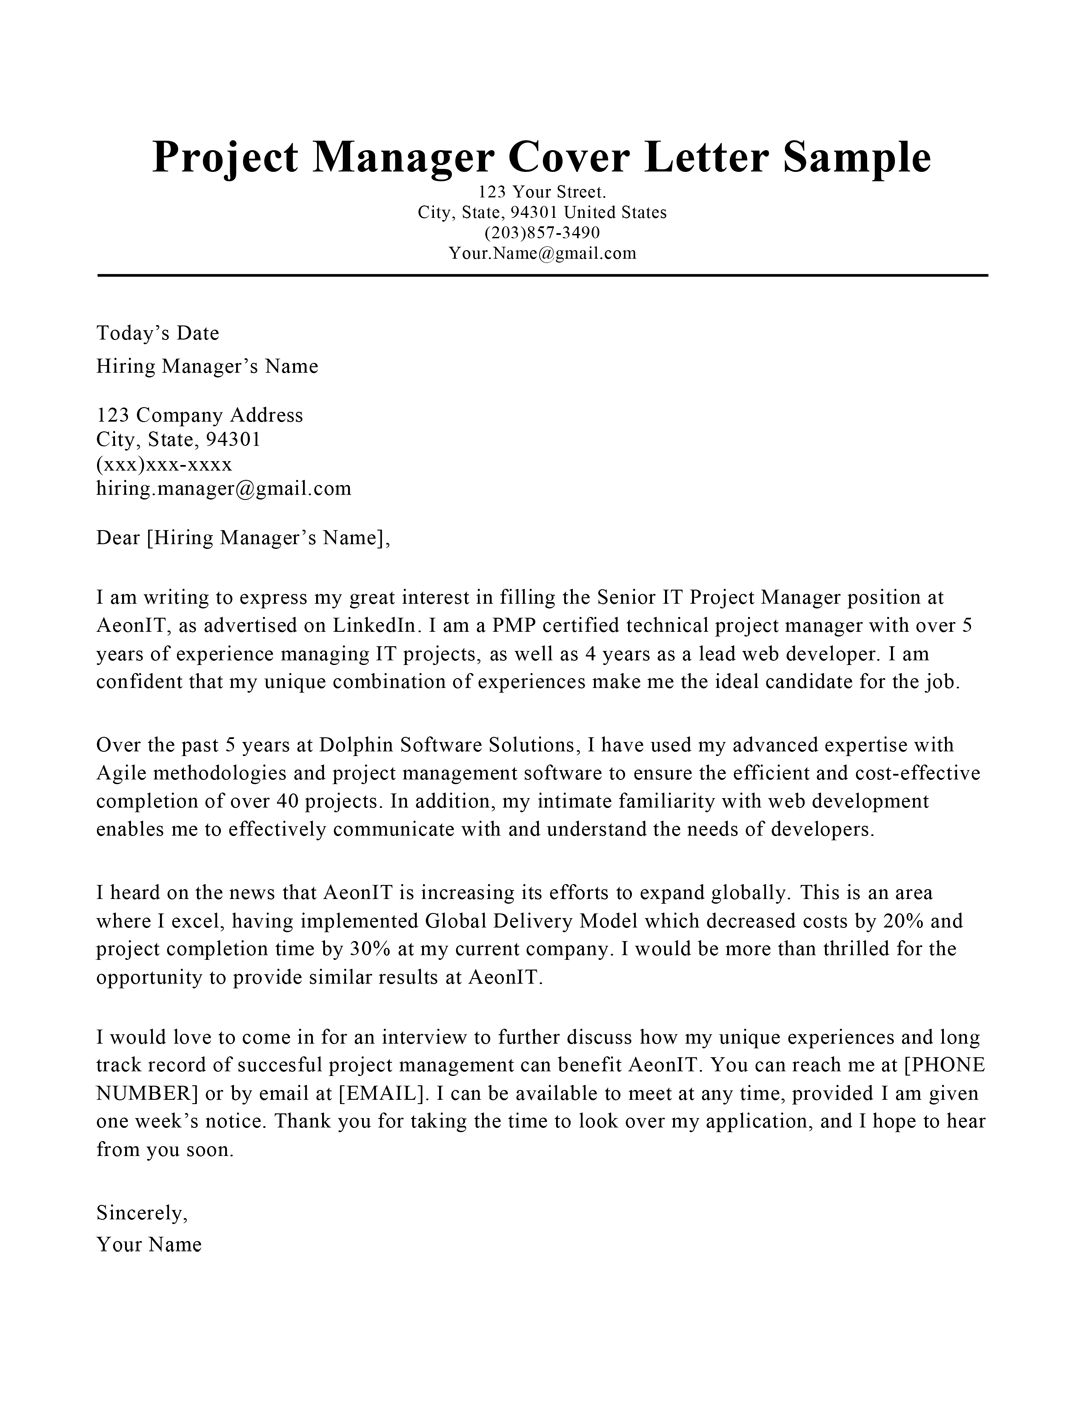 Sample Cover Letter For Management from resumecompanion.com